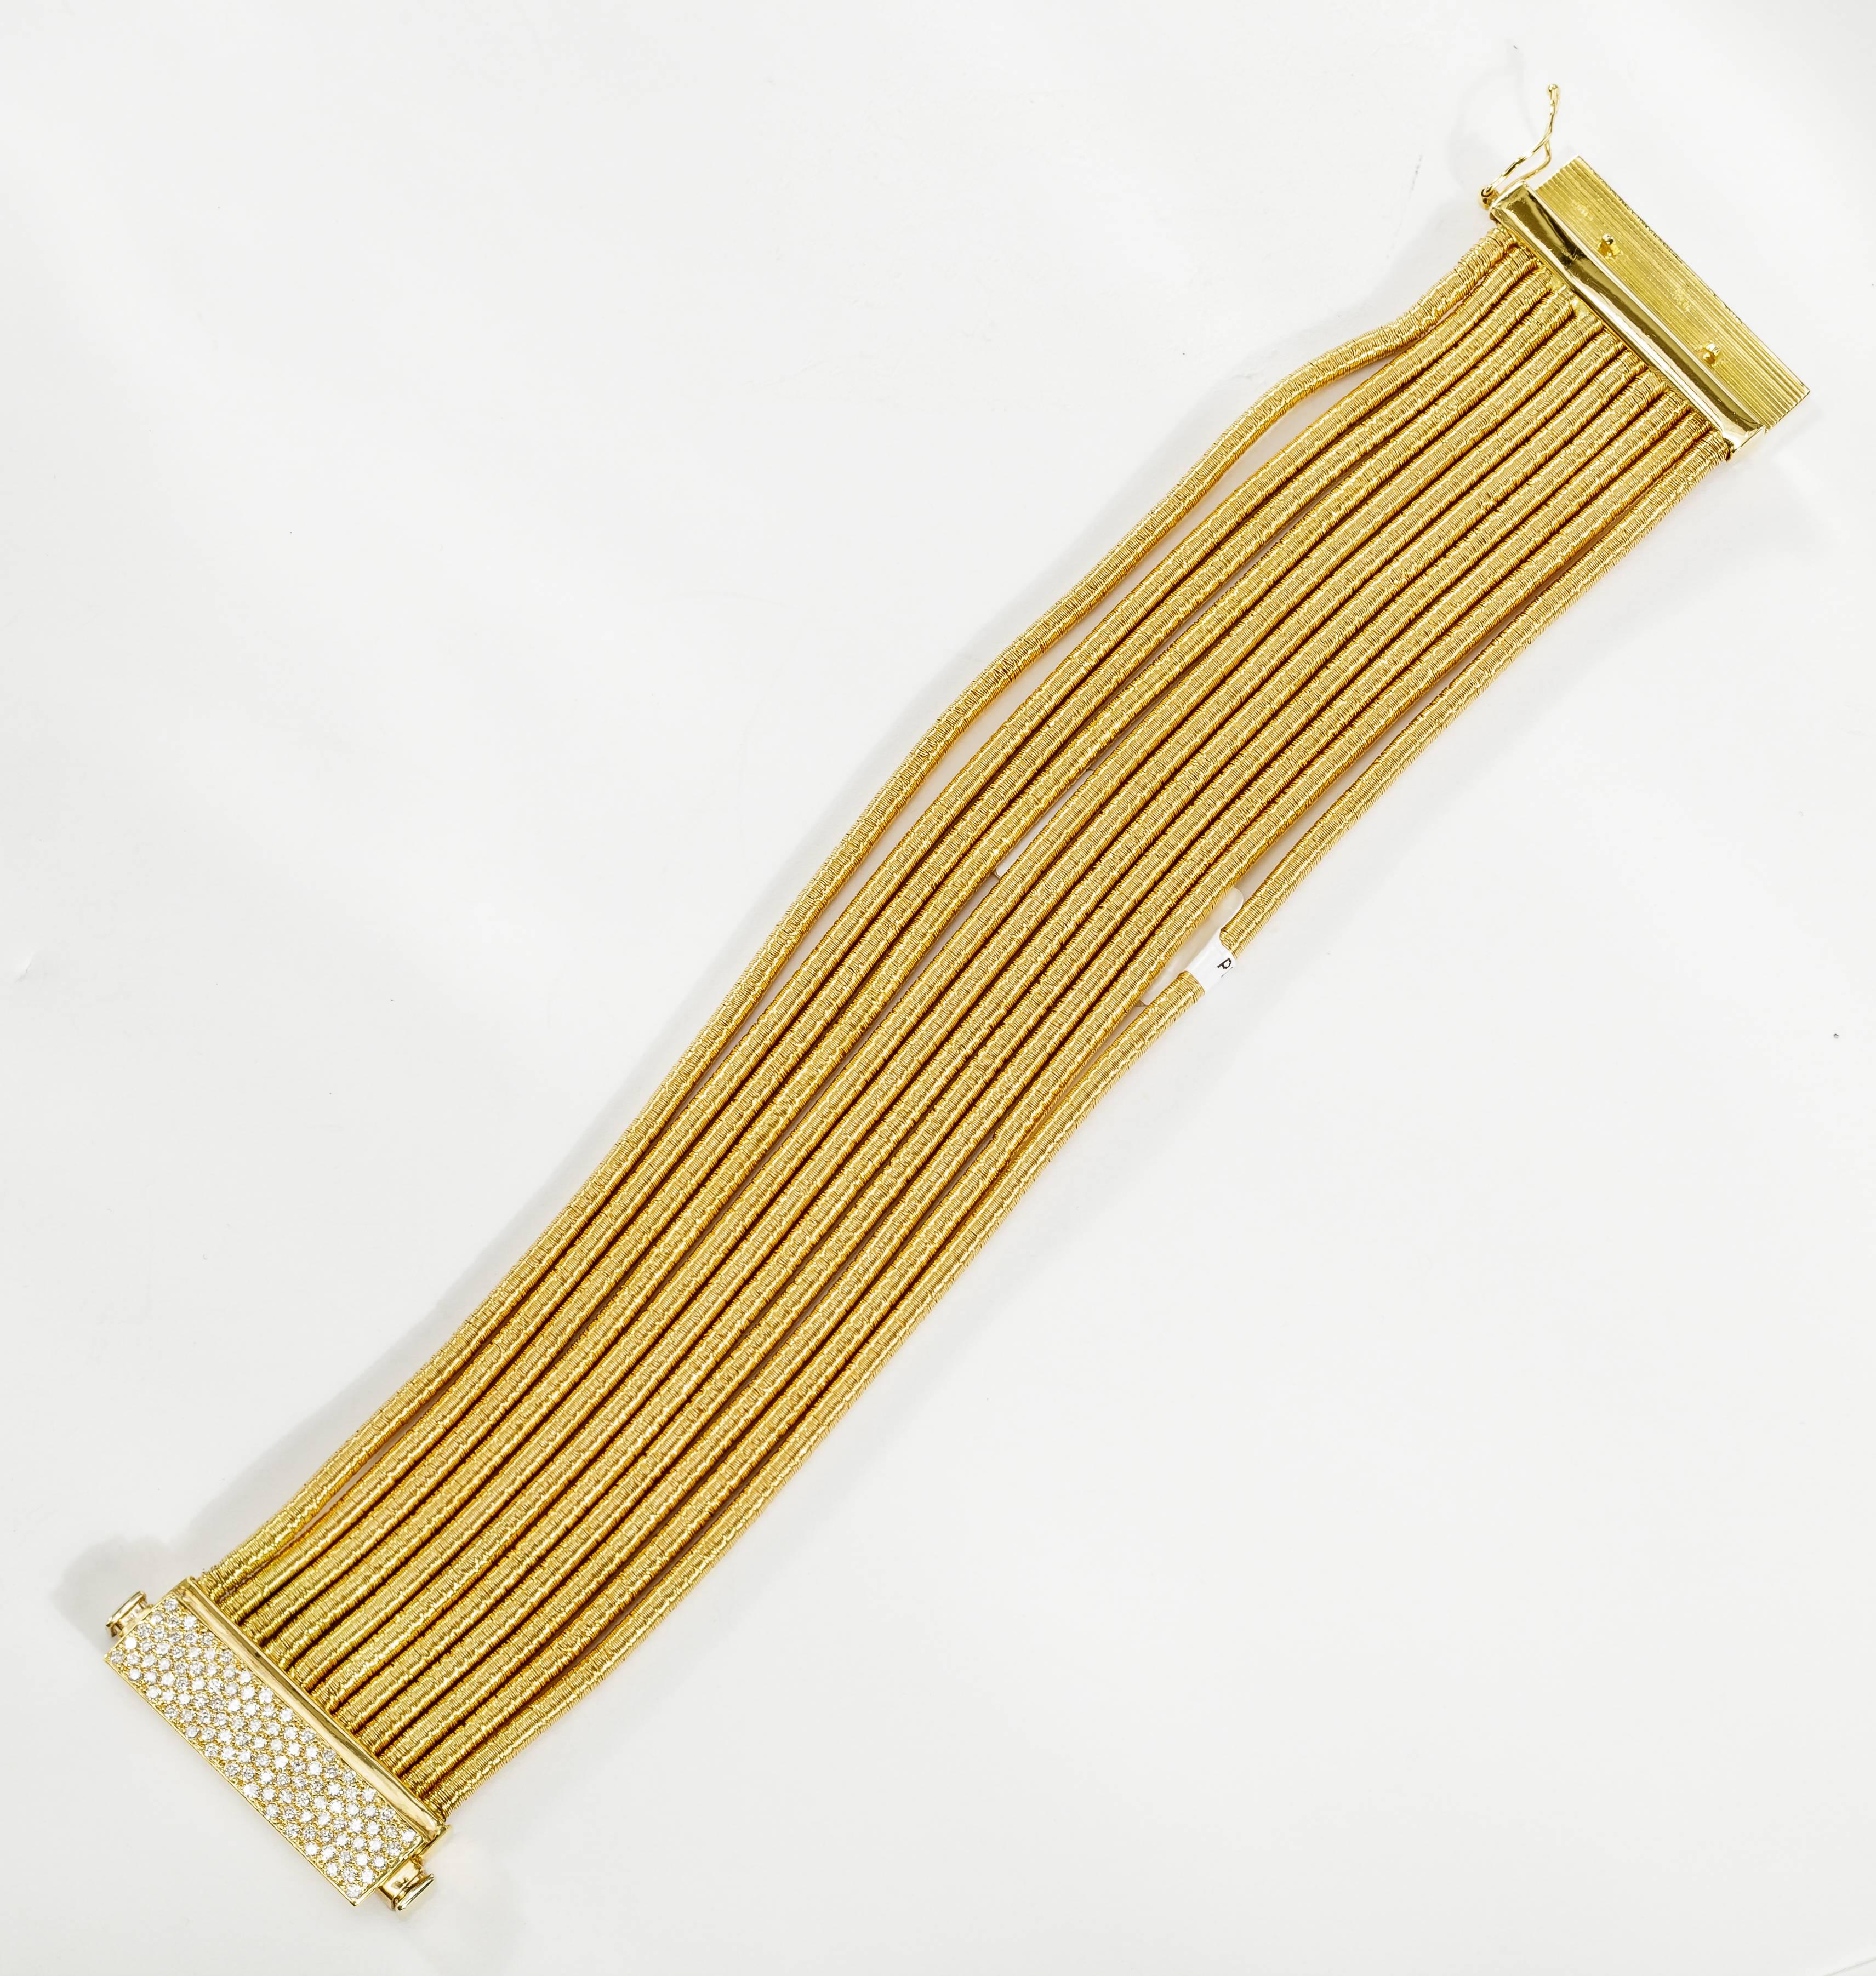 This 18k yellow gold Yvel bracelet has 11 flexible strands and is set with pavé diamonds totaling 1.10 ct.  The bracelet measures 6.5 inches. 